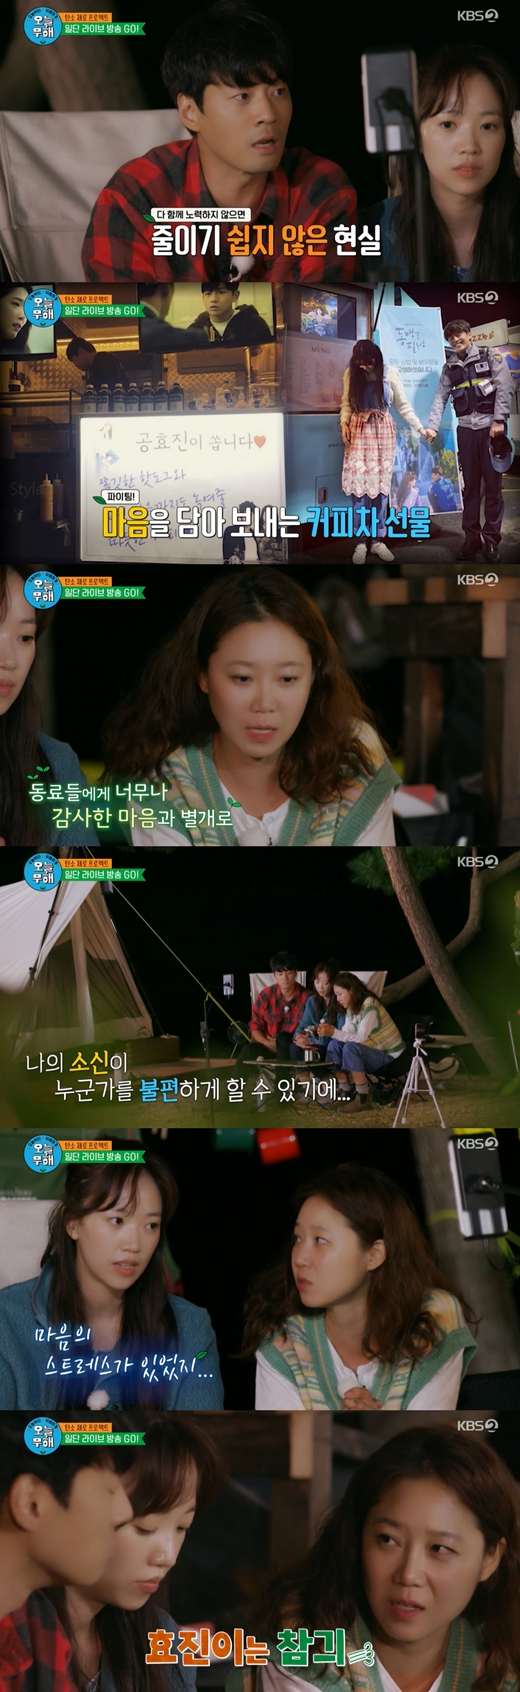 Actor Gong Hyo-jin has expressed his belief in environmental protection.In the third KBS 2TV entertainment program Innocuous from Today broadcasted on the 28th, the next day of Shinai of Gong Hyo-jin, Lee Chun-hee and Hye-Jin Jeon was drawn.The three of them had a relaxed day, leading the way in minimizing carbon emissions, and those who opened their breakfast with coffee and French toast, which were made of multi-use cloth, headed to the sea to pick up the garbage.Theres a lot of waste, Lee Chun-hee said, surprised by the sharpness: Theres a lot of plastic.This was a bit too much, Gong Hyo-jin pointed out, lifting up the glass fragments; even though he picked it up for a while, two sacks packed with trash made him sad.Gong Hyo-jin said he was worried before shooting unharmed from today. He was worried about environmental entertainment.I want to convey my attention to viewers and to inform them of their Outdoor Research manners. I am not crazy now. I do not want to be another entertainment. As the filming was stopped and the emergency meeting began, the production team predicted the composition and contents of the new method.So, Gong Hyo-jin opened SNS live broadcasts and started to communicate more actively. In particular, viewers became Carbon Xero seniors and released various honey tips.Gong Hyo-jin said, When your colleagues send you drinks, snacks, and coffee tea, it does not make sense to say I do not use.There were times when I went to various things, so I had stress of my mind. I want to eat coffee, but if I do not have a tumbler, I will tolerate it. People who like convenience are not bad. I hope that I can tell more about my job.Lee Chun-hee also said: I need things to replace; Ive heard a lot about being exceptional, but I think I should do it now.I do not want to hear that, so I should not do the same. Plastic waste, in particular, has increased by 15.6 percent since Covid19; Gong Hyo-jin said: We also found Mask at sea today, which would be nice if companies changed their Mask material.Its going to be difficult, but Im using Mask made from corn starch now, but the price is three times.Meanwhile, Hye-Jin Jeon also agreed: There is a sense of pride coming from discomfort; I think its not just tired to have a pleasant eco-friendly life.